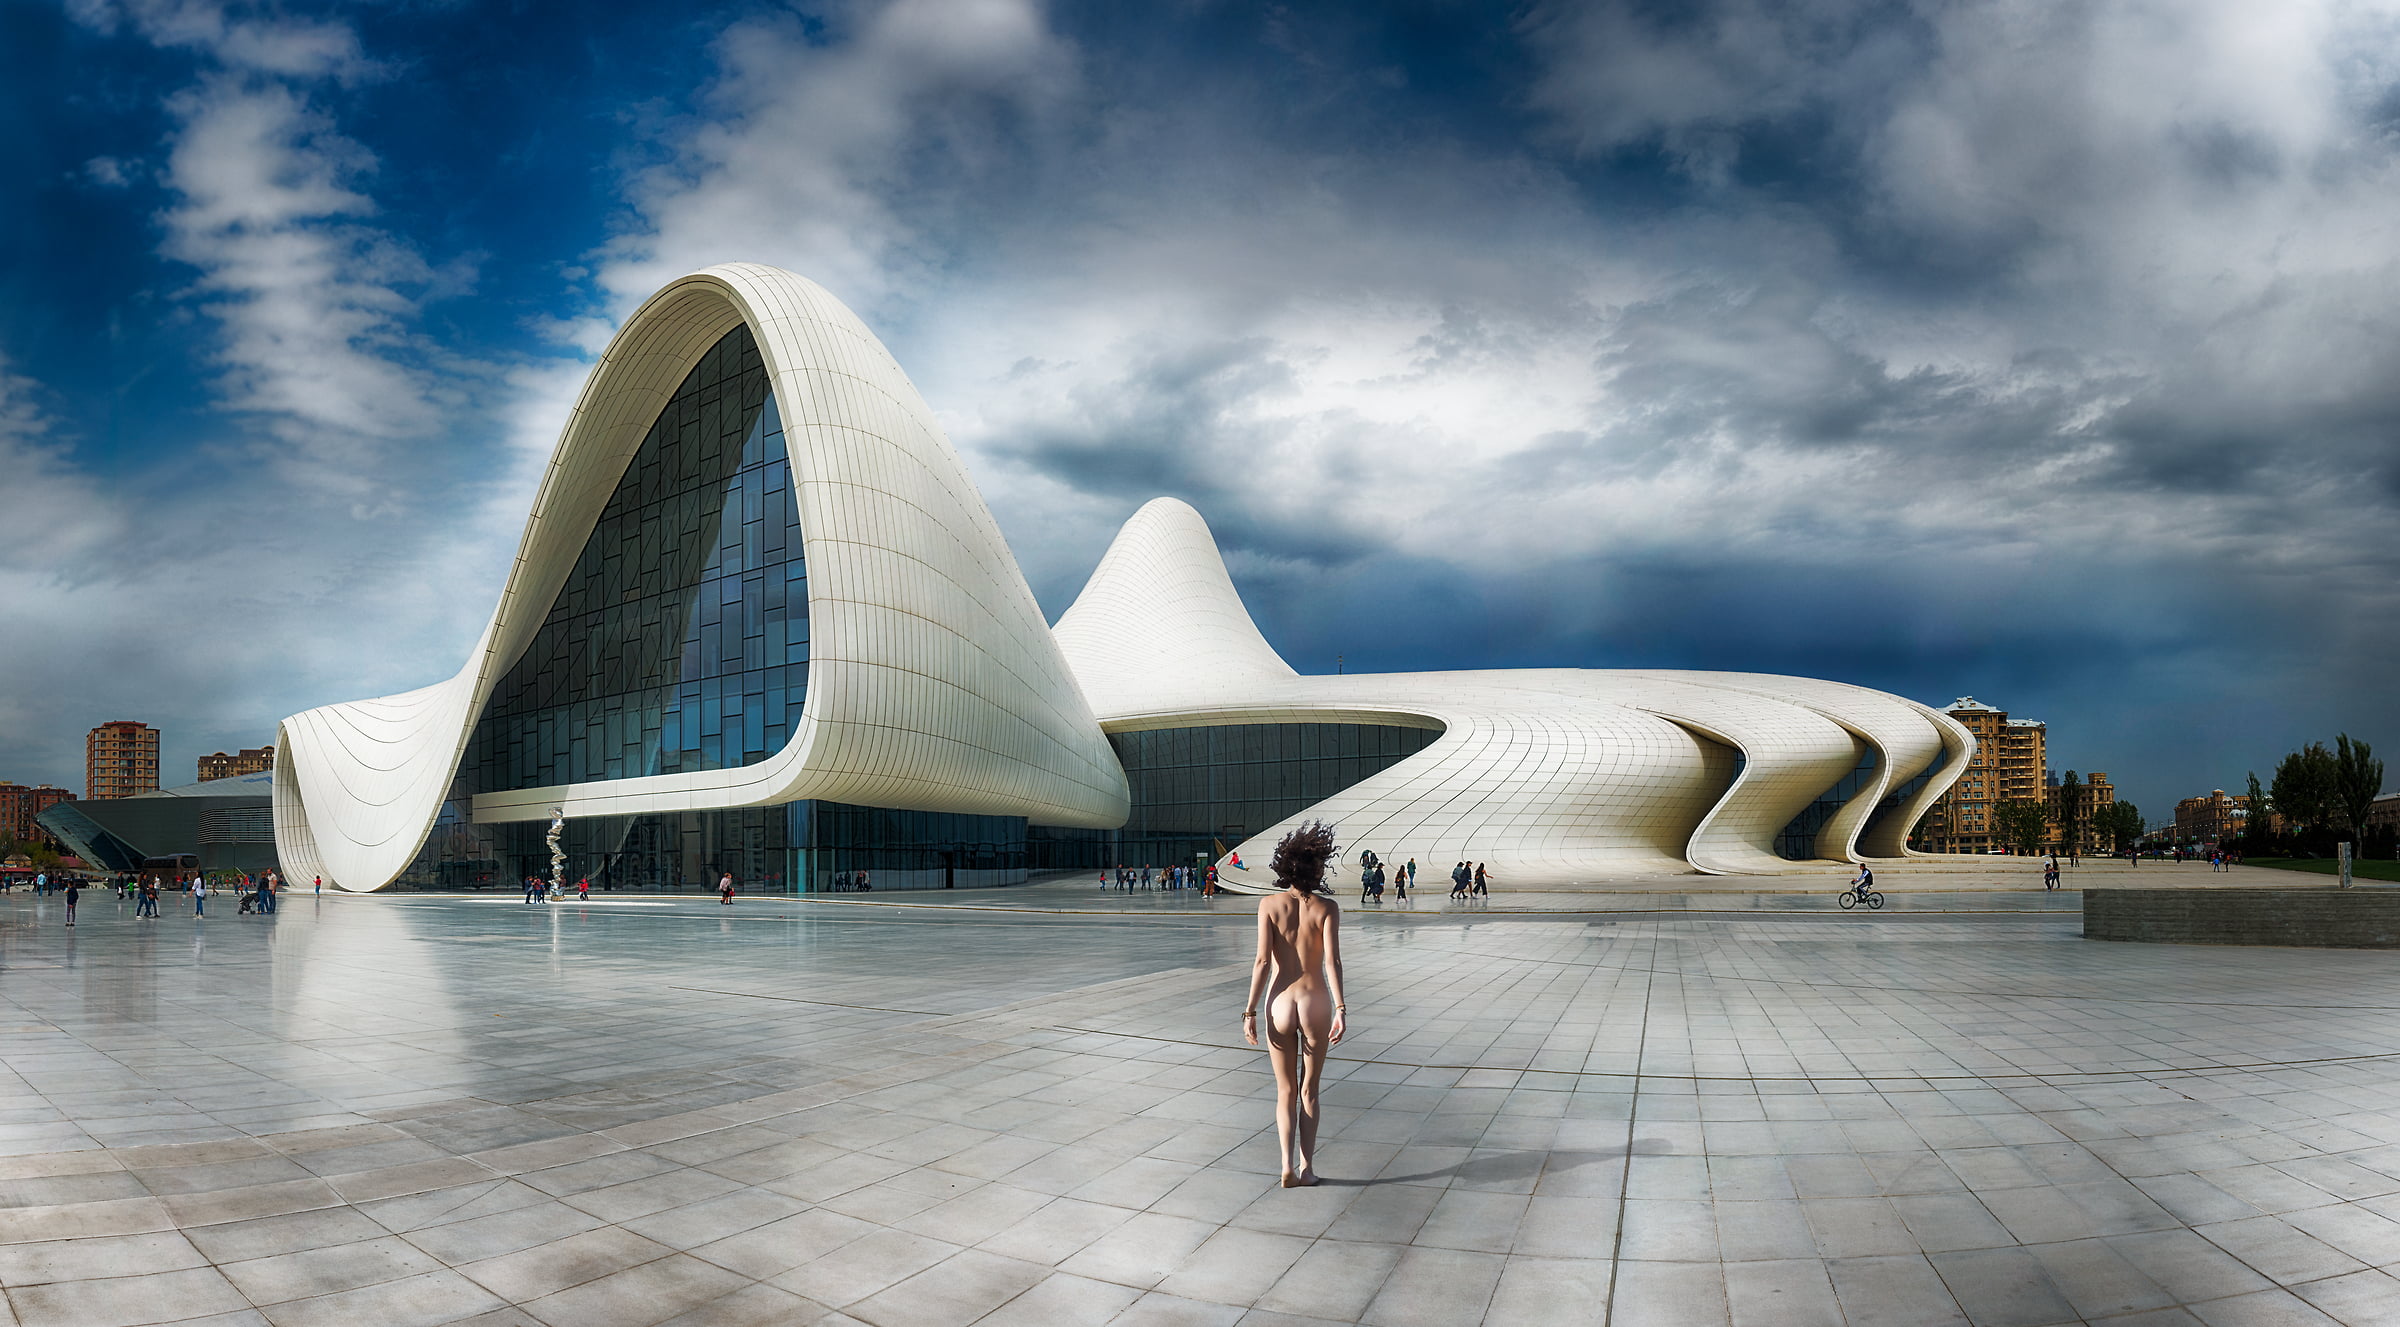 159 megapixels! A very high resolution, large-format VAST photo print of a nude woman in a plaza in front of a modern building; surreal nude photograph created by Peter Rodger in Heydar Aliyev Center, Baku, Azerbaijan.